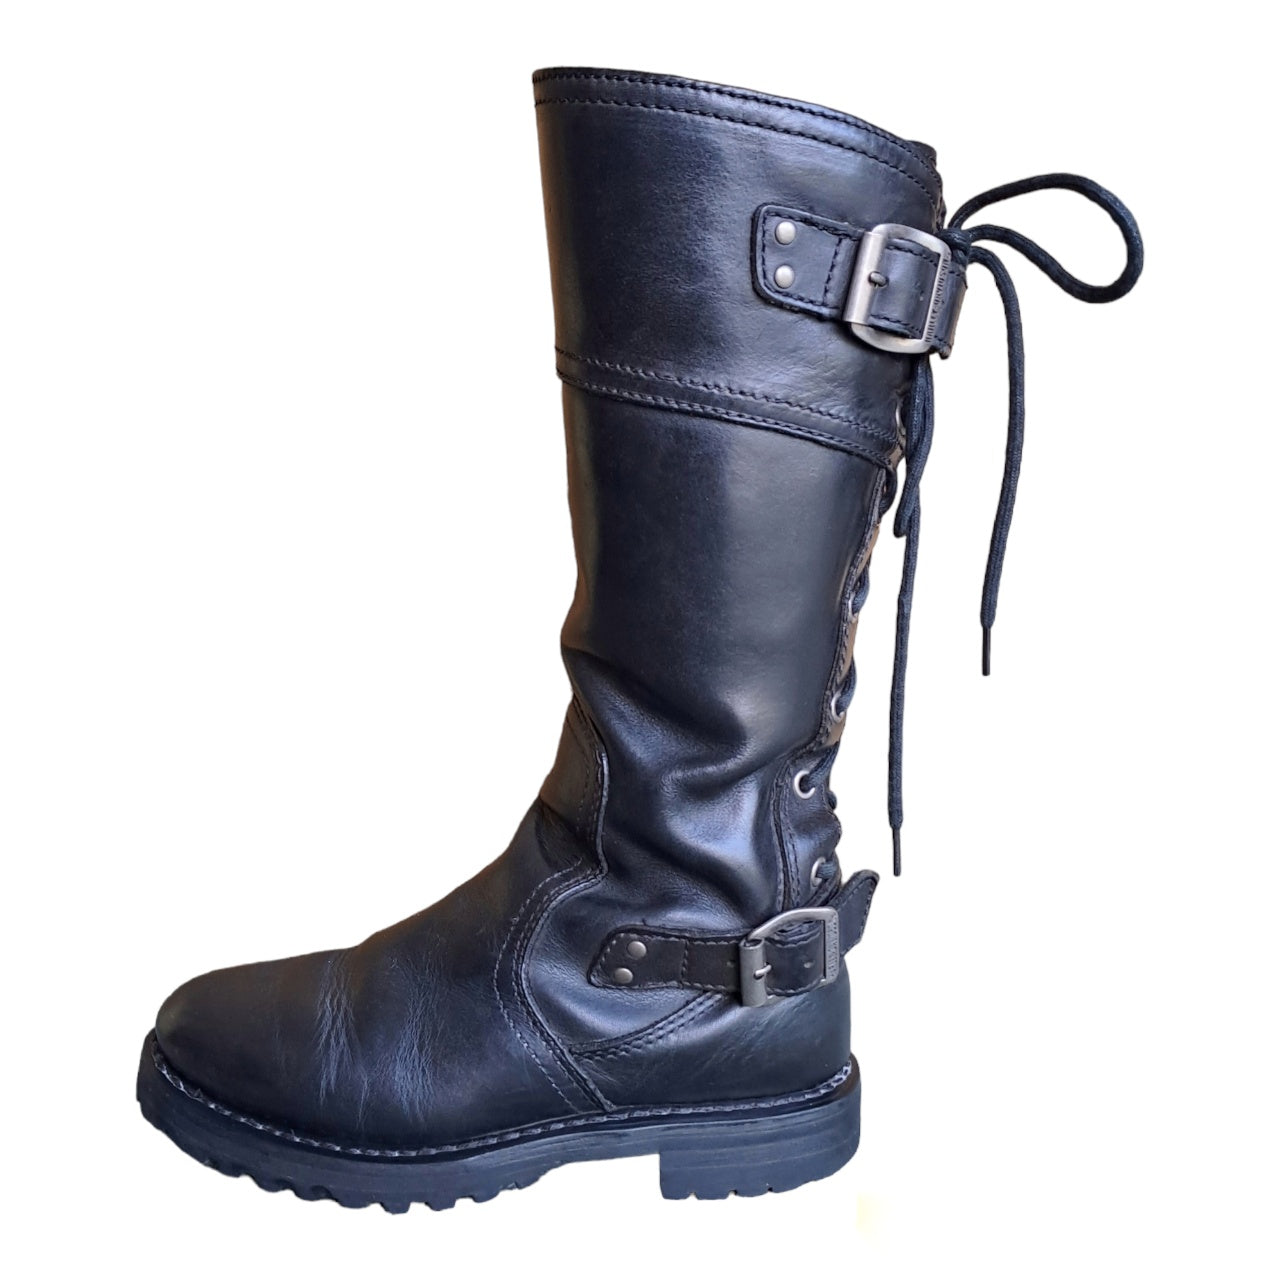 SOLD OUT | Harley Davidson Boots